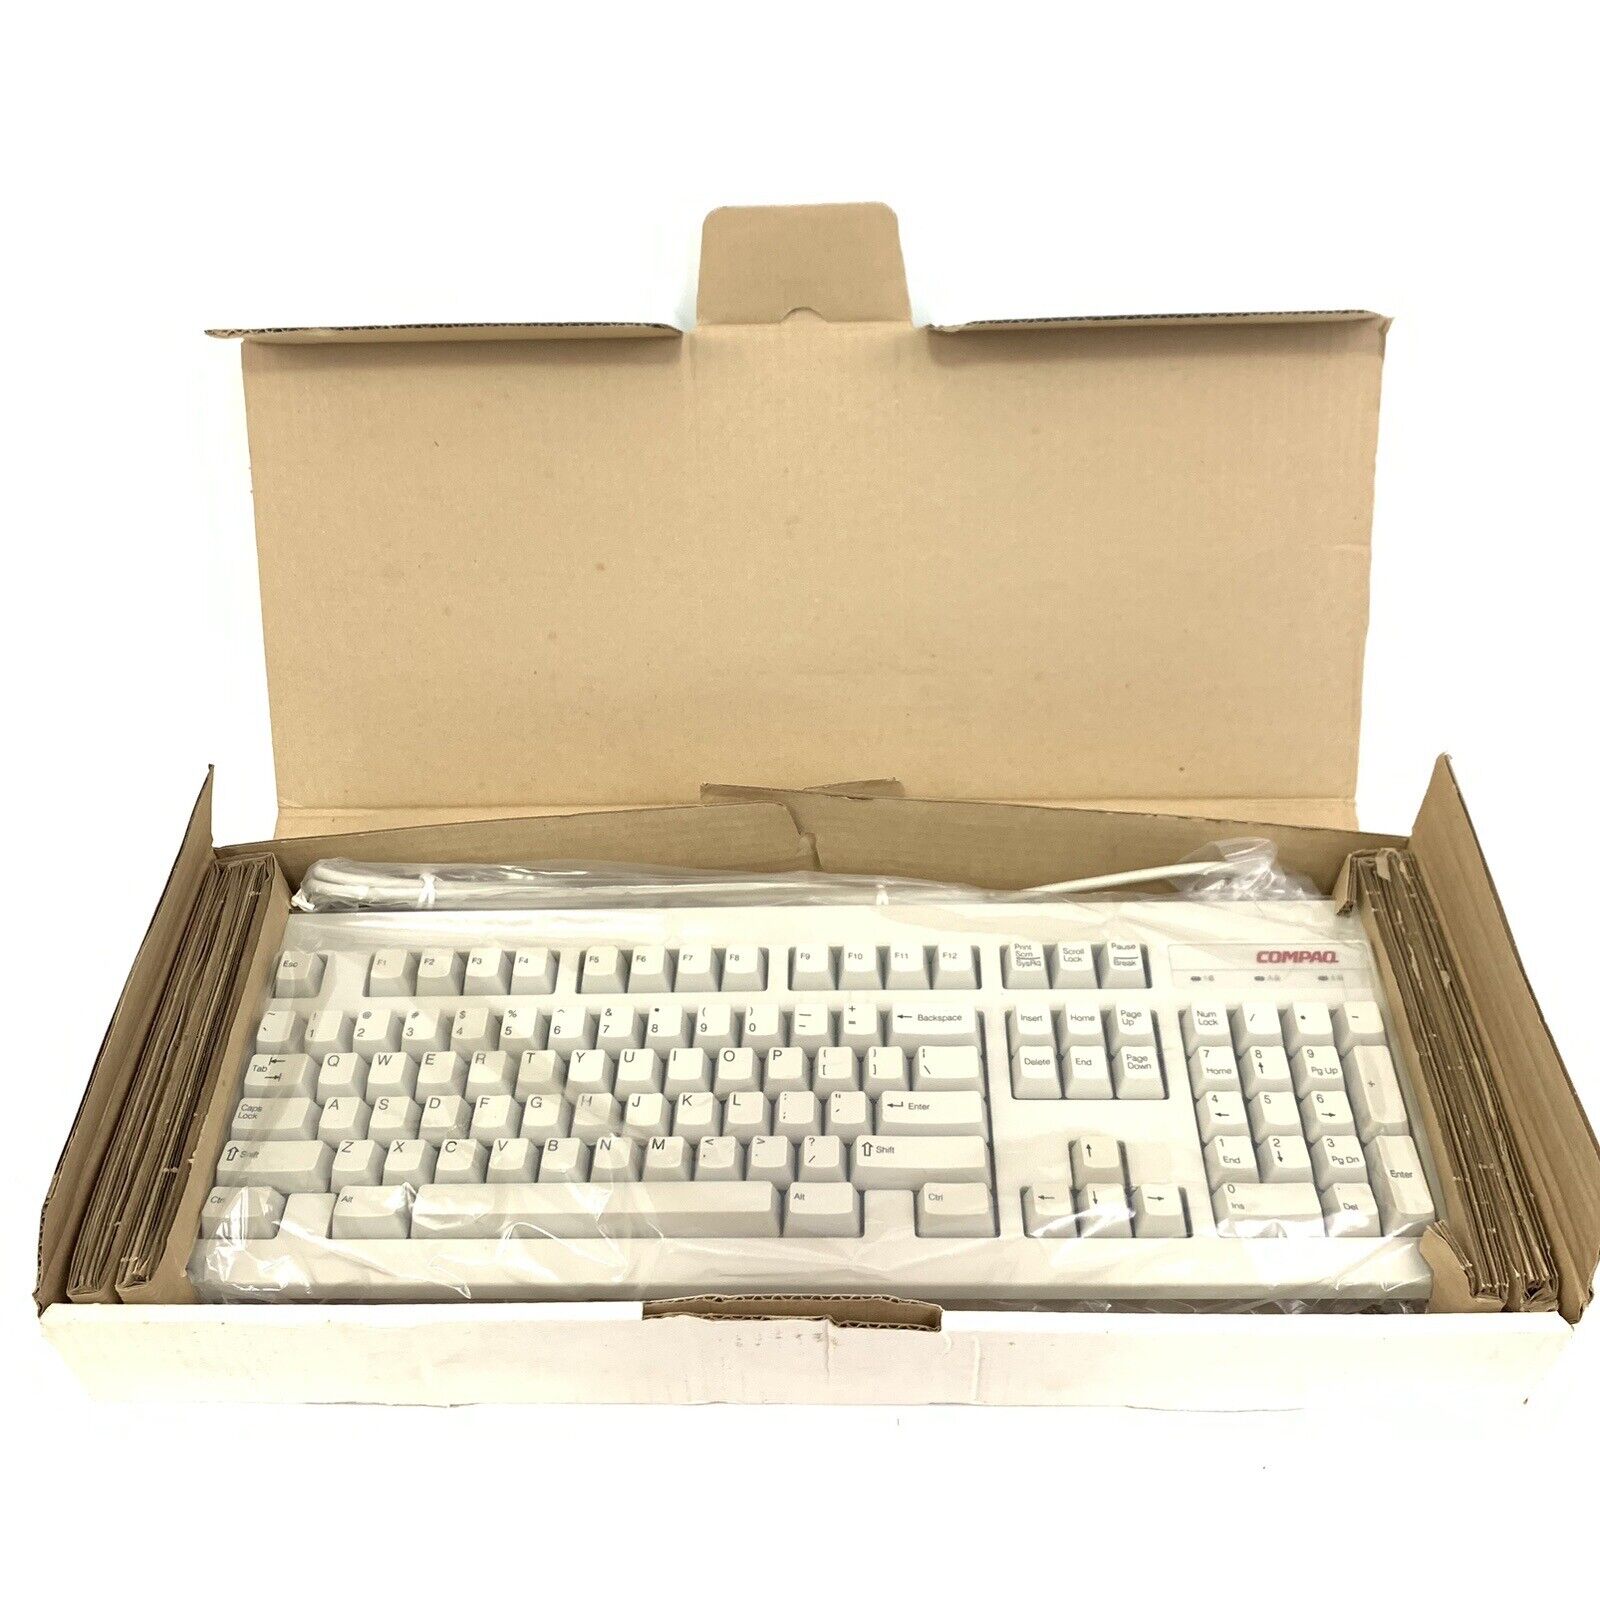 New Vintage Compaq PS/2 Computer Keyboard RT101 PN 120375-001 Old Stock #8091